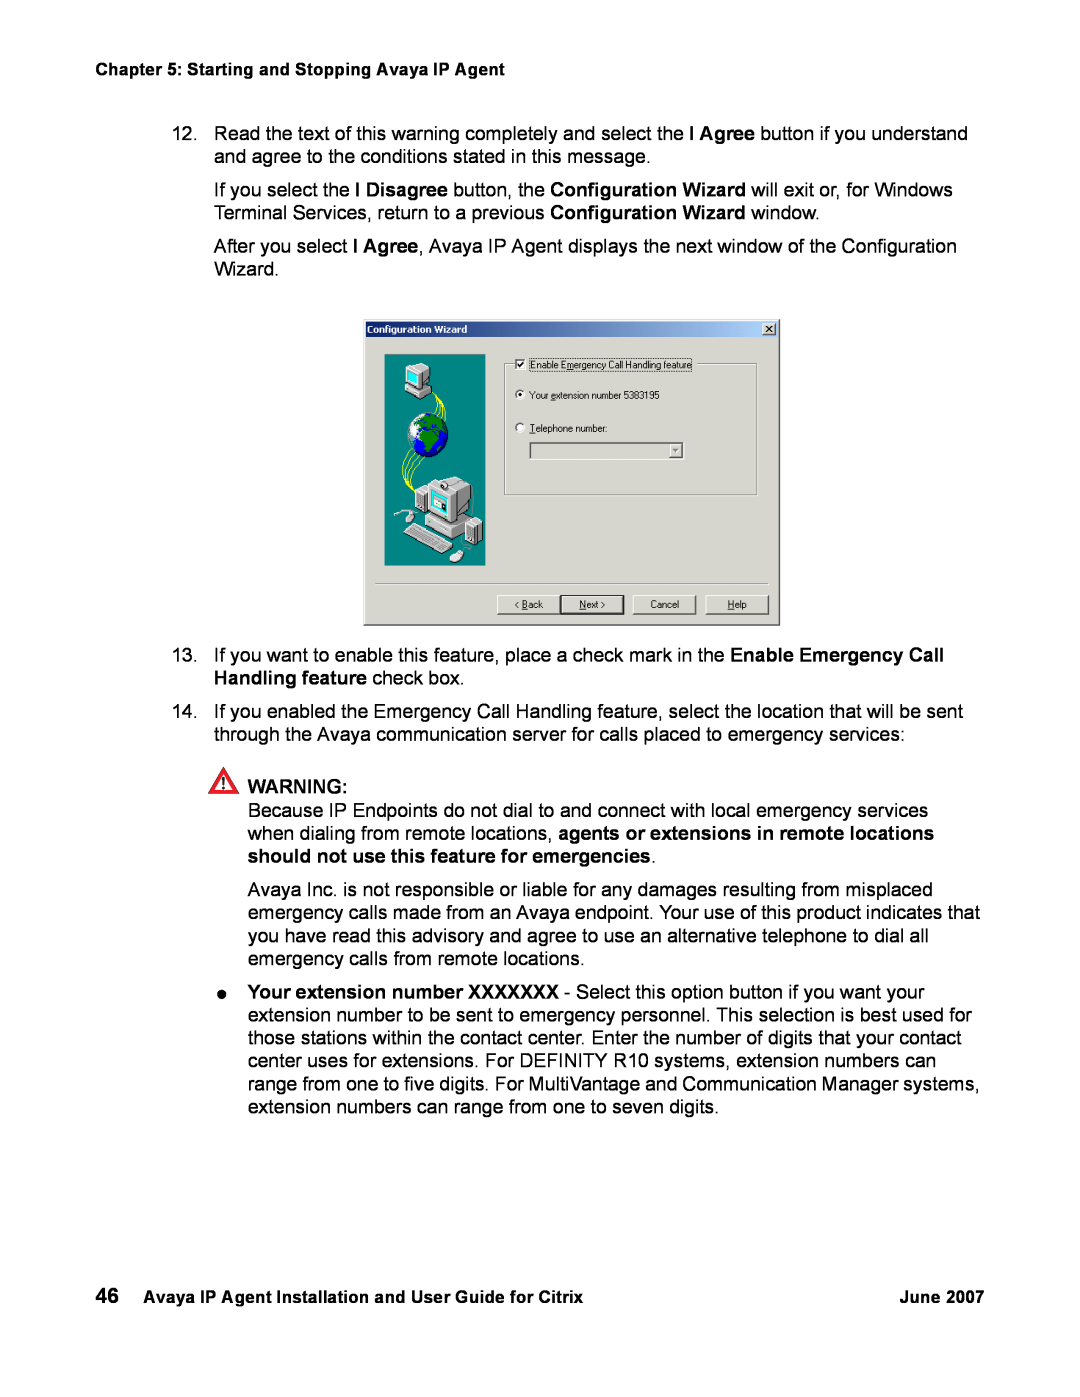 Avaya 7 manual Starting and Stopping Avaya IP Agent, Avaya IP Agent Installation and User Guide for Citrix, June 